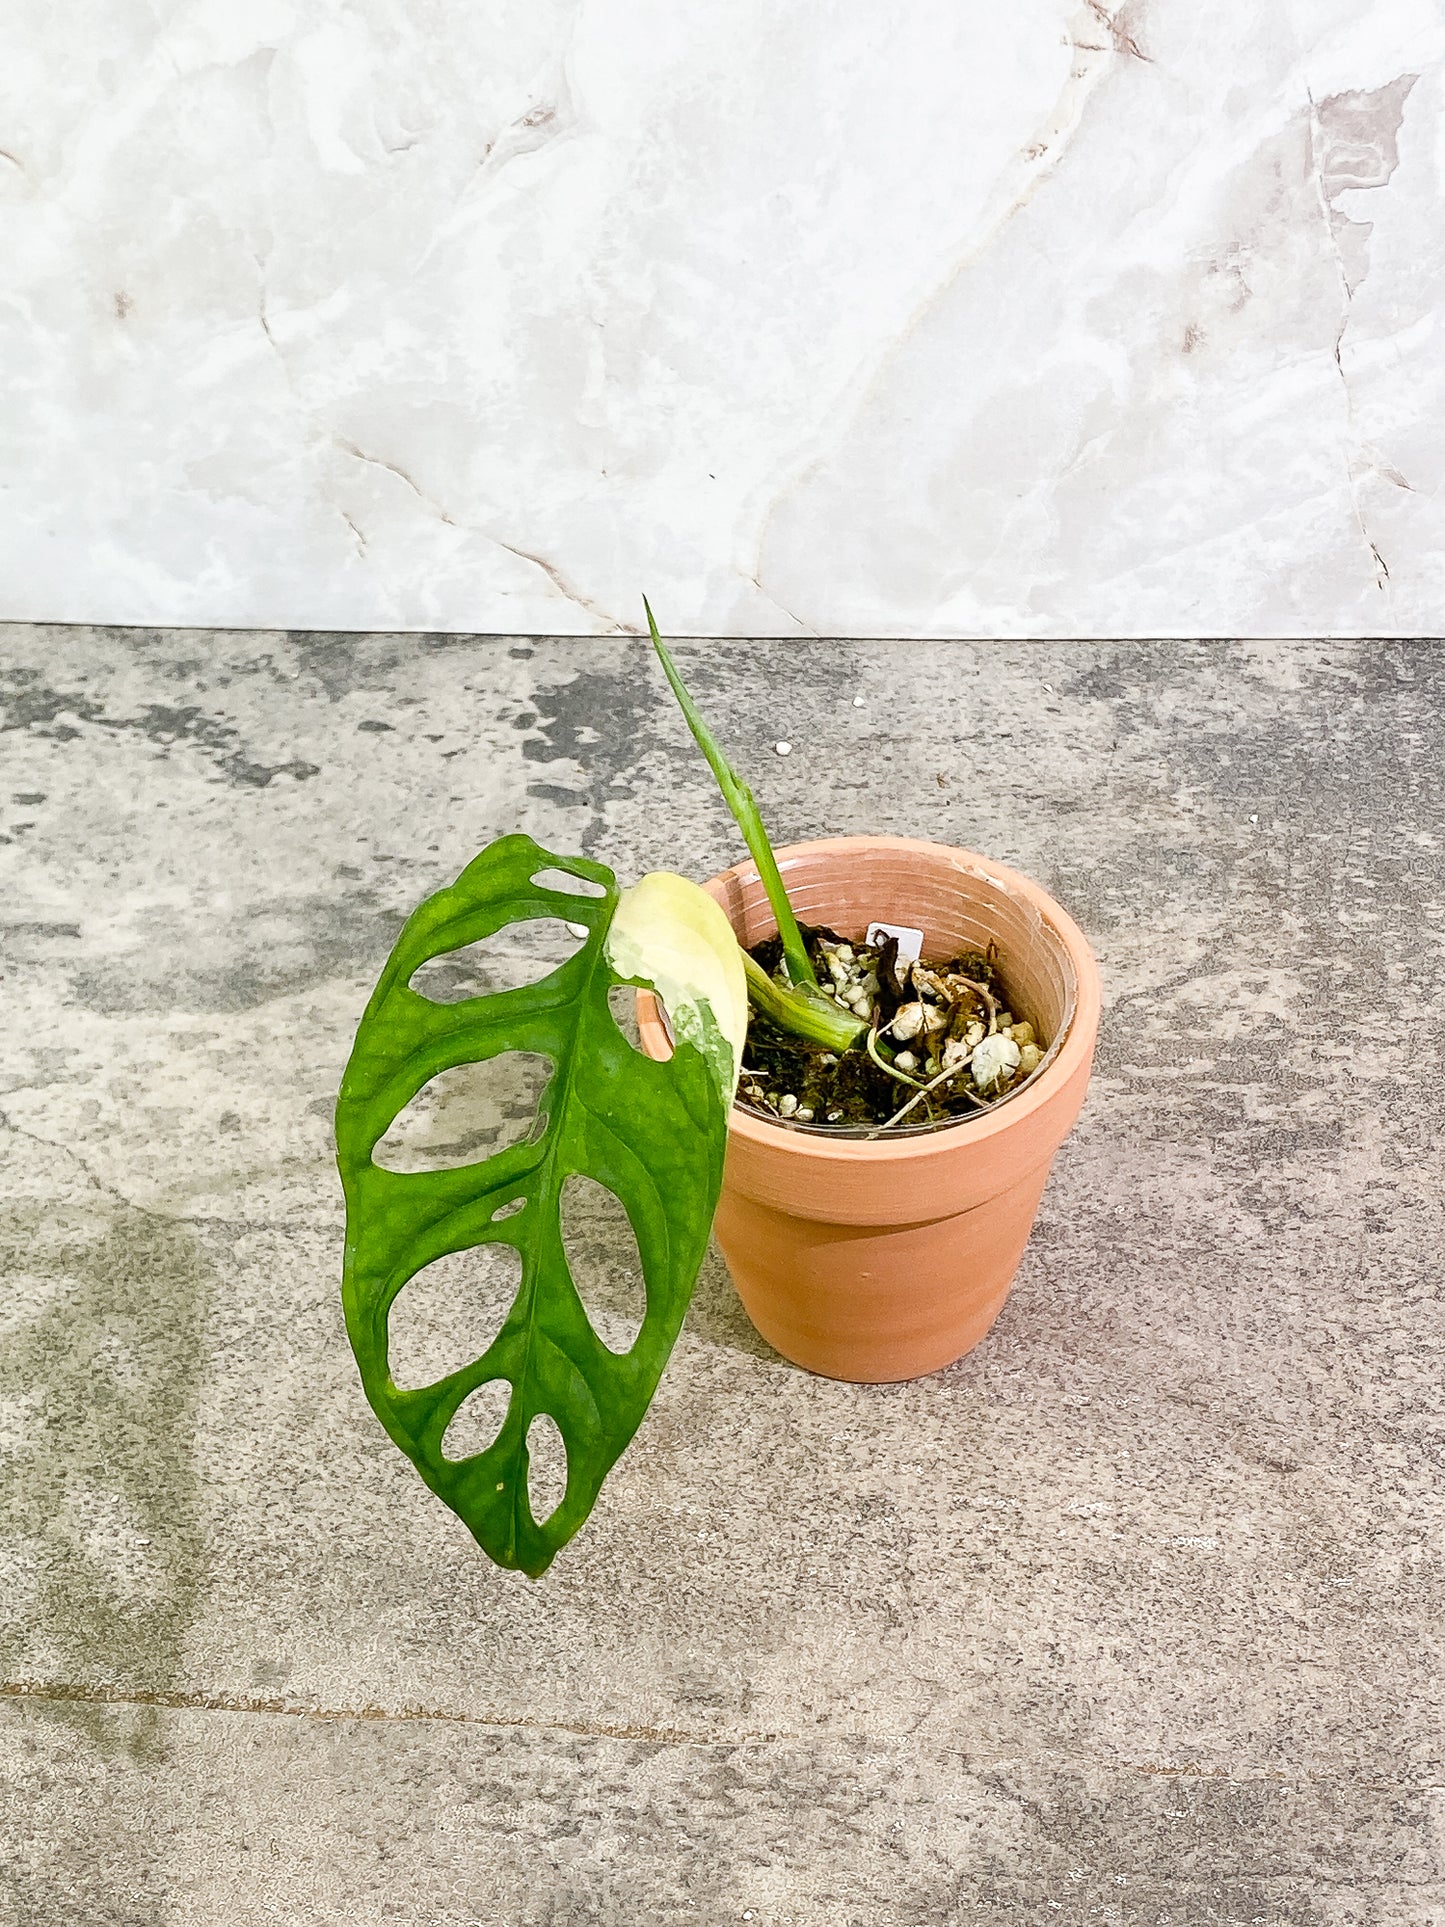 Monstera Adansonii Aurea 1 leaf 1 sprout fully rooted